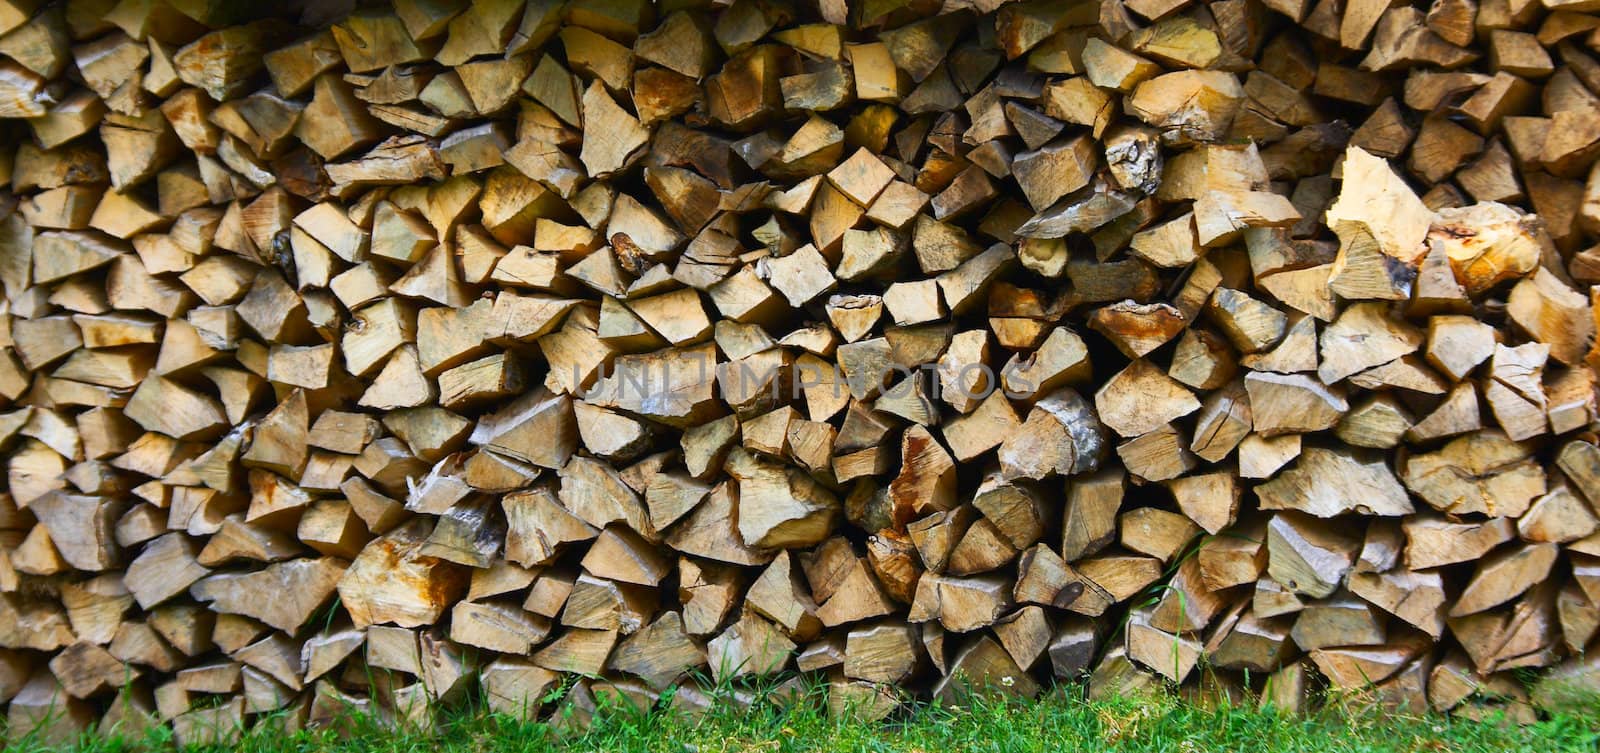 Woodpile by Dominator